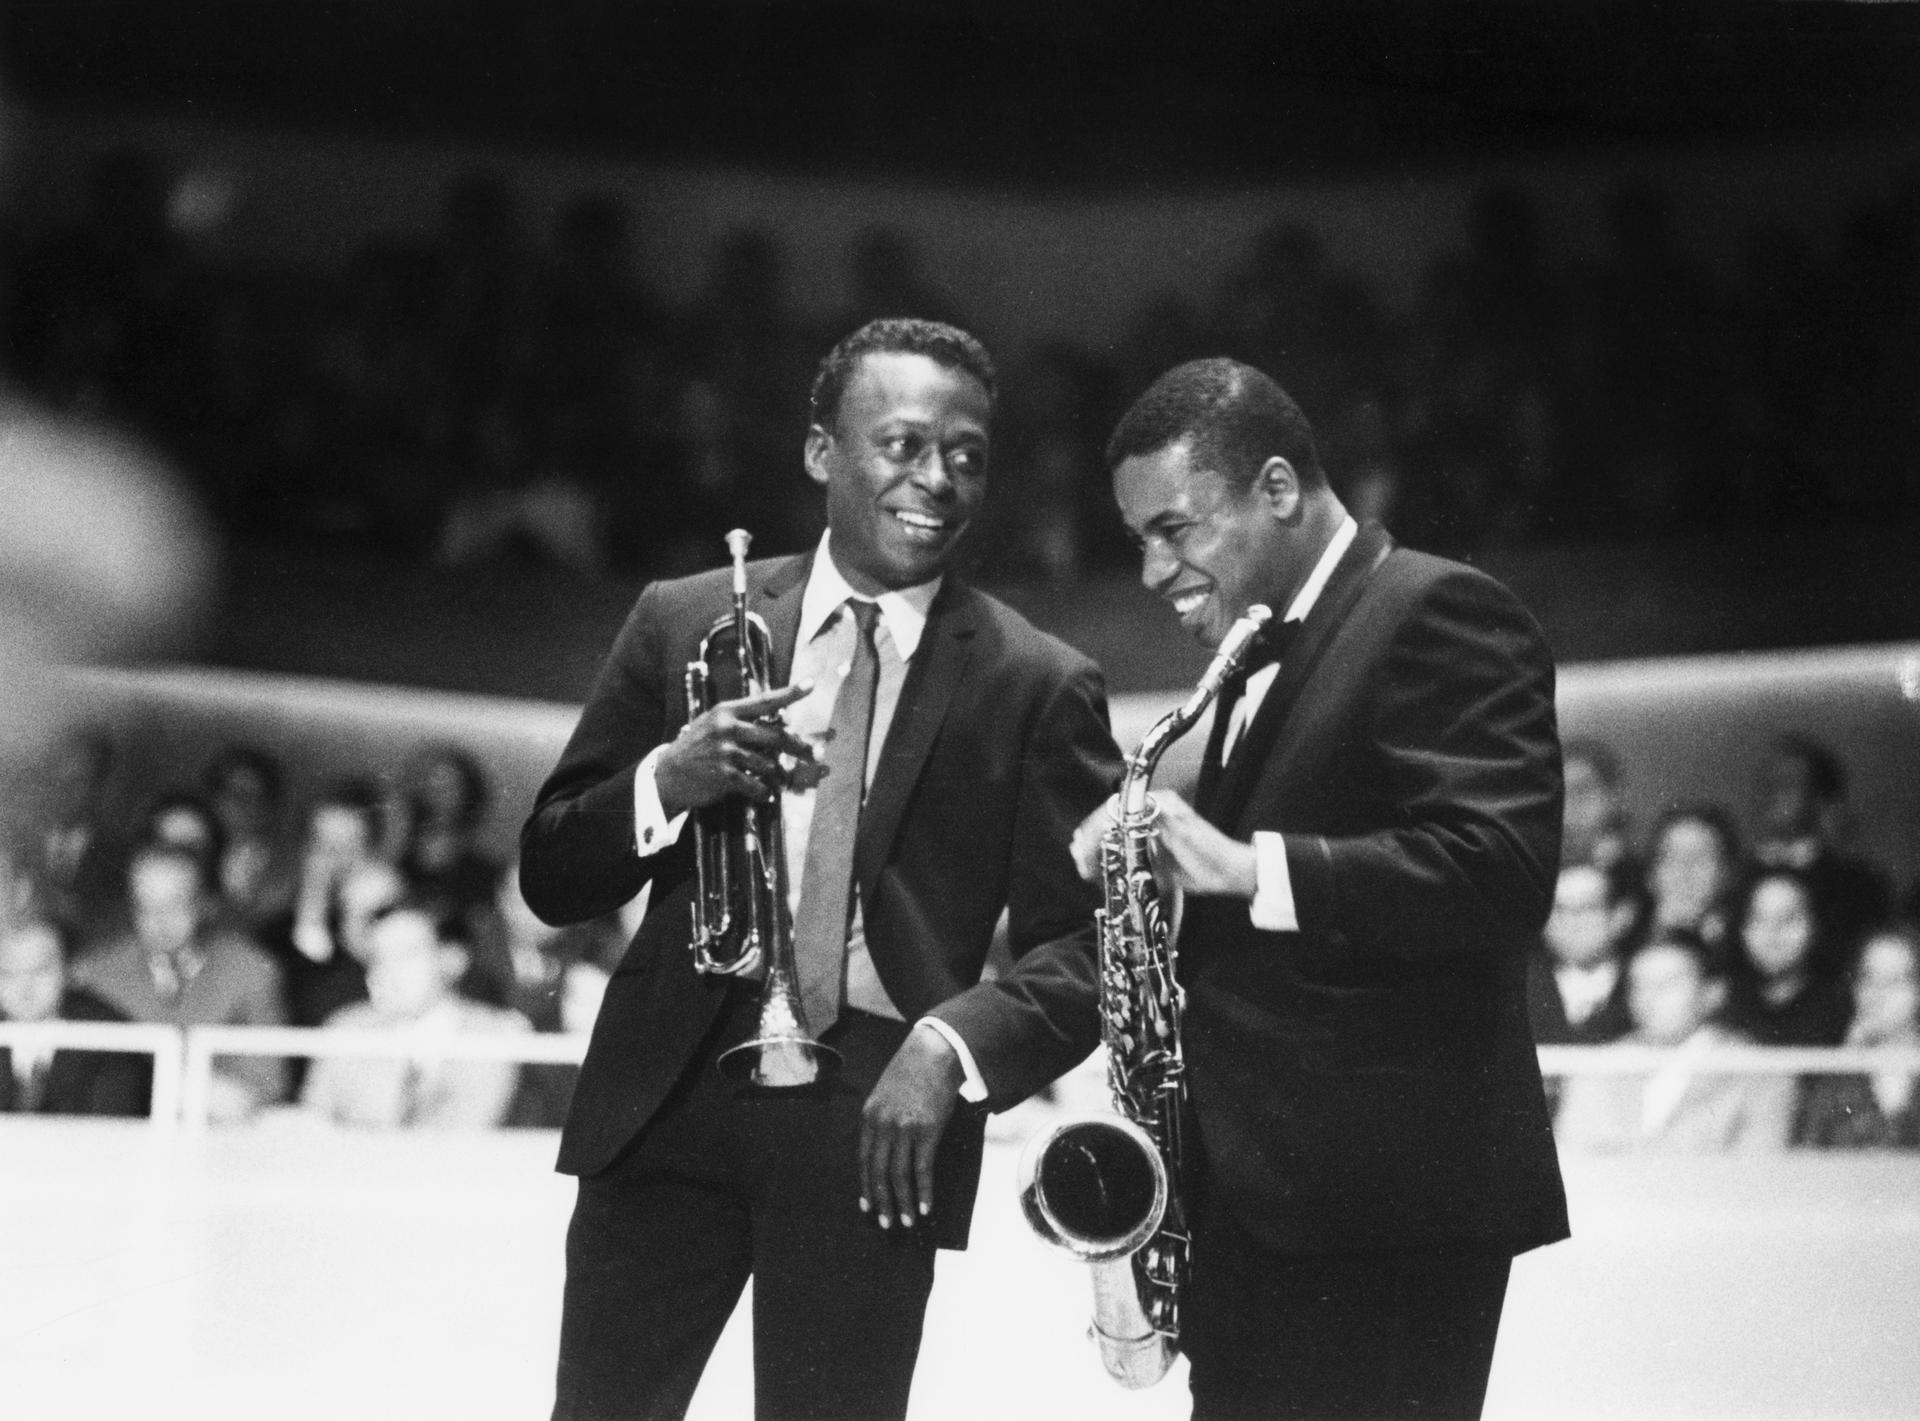 Wayne Shorter's long career has seen him collaborate with some of the all-time greats including Miles Davis (on the left in this 1964 photo of the two in Berlin). Photos: Corbis, Robert Ascroft